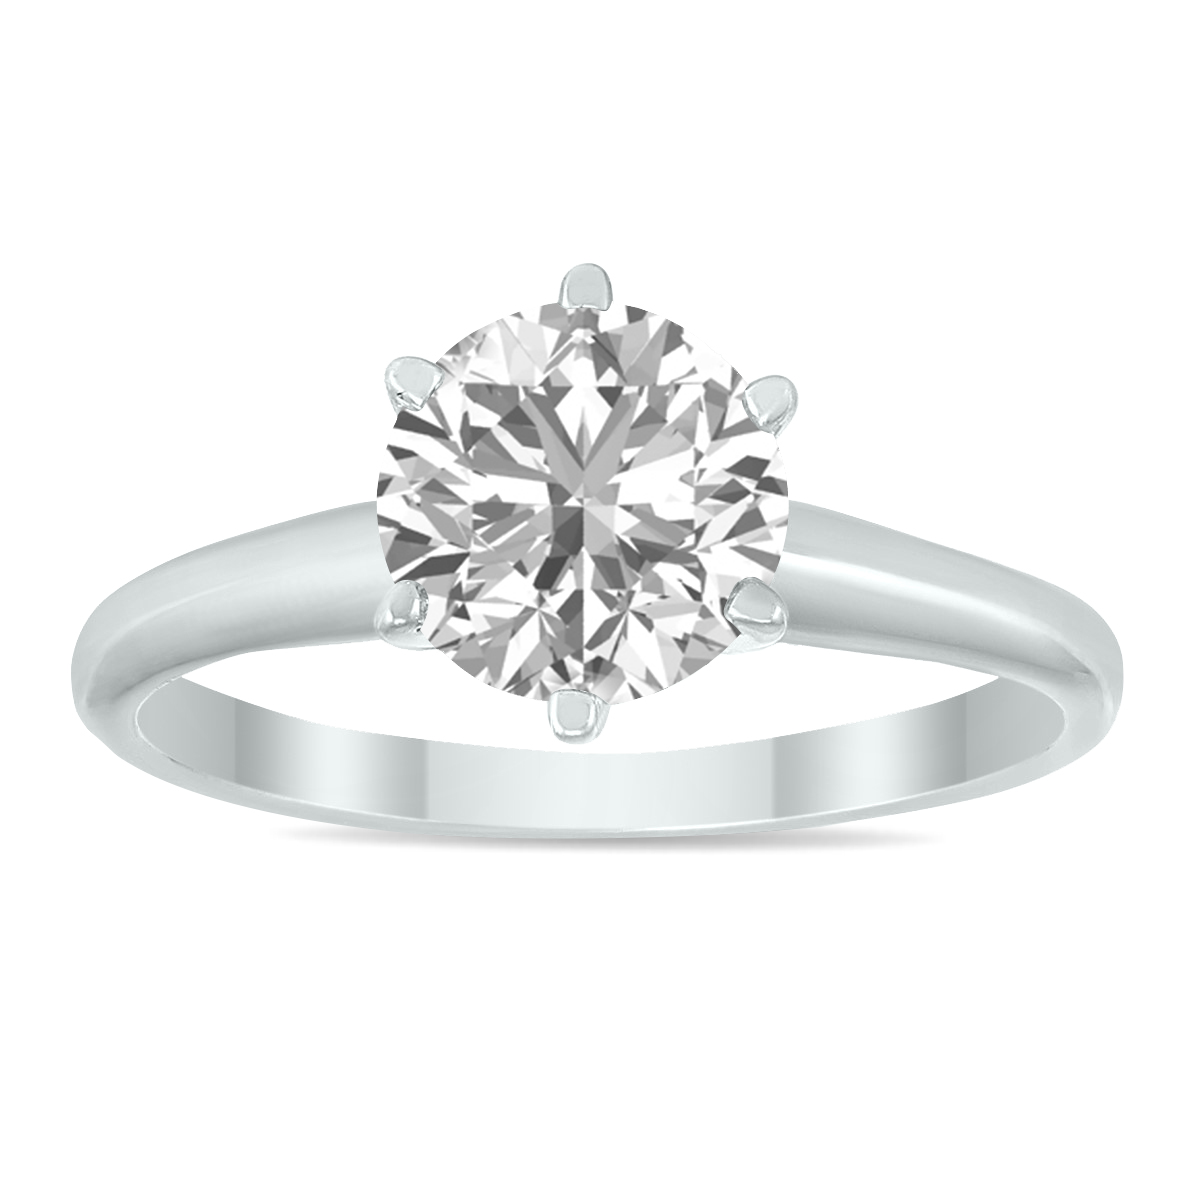 Image of IGI Certified Lab Grown 1 1/10 Carat Diamond Solitaire Ring in 14K White Gold (J Color SI2 Clarity)